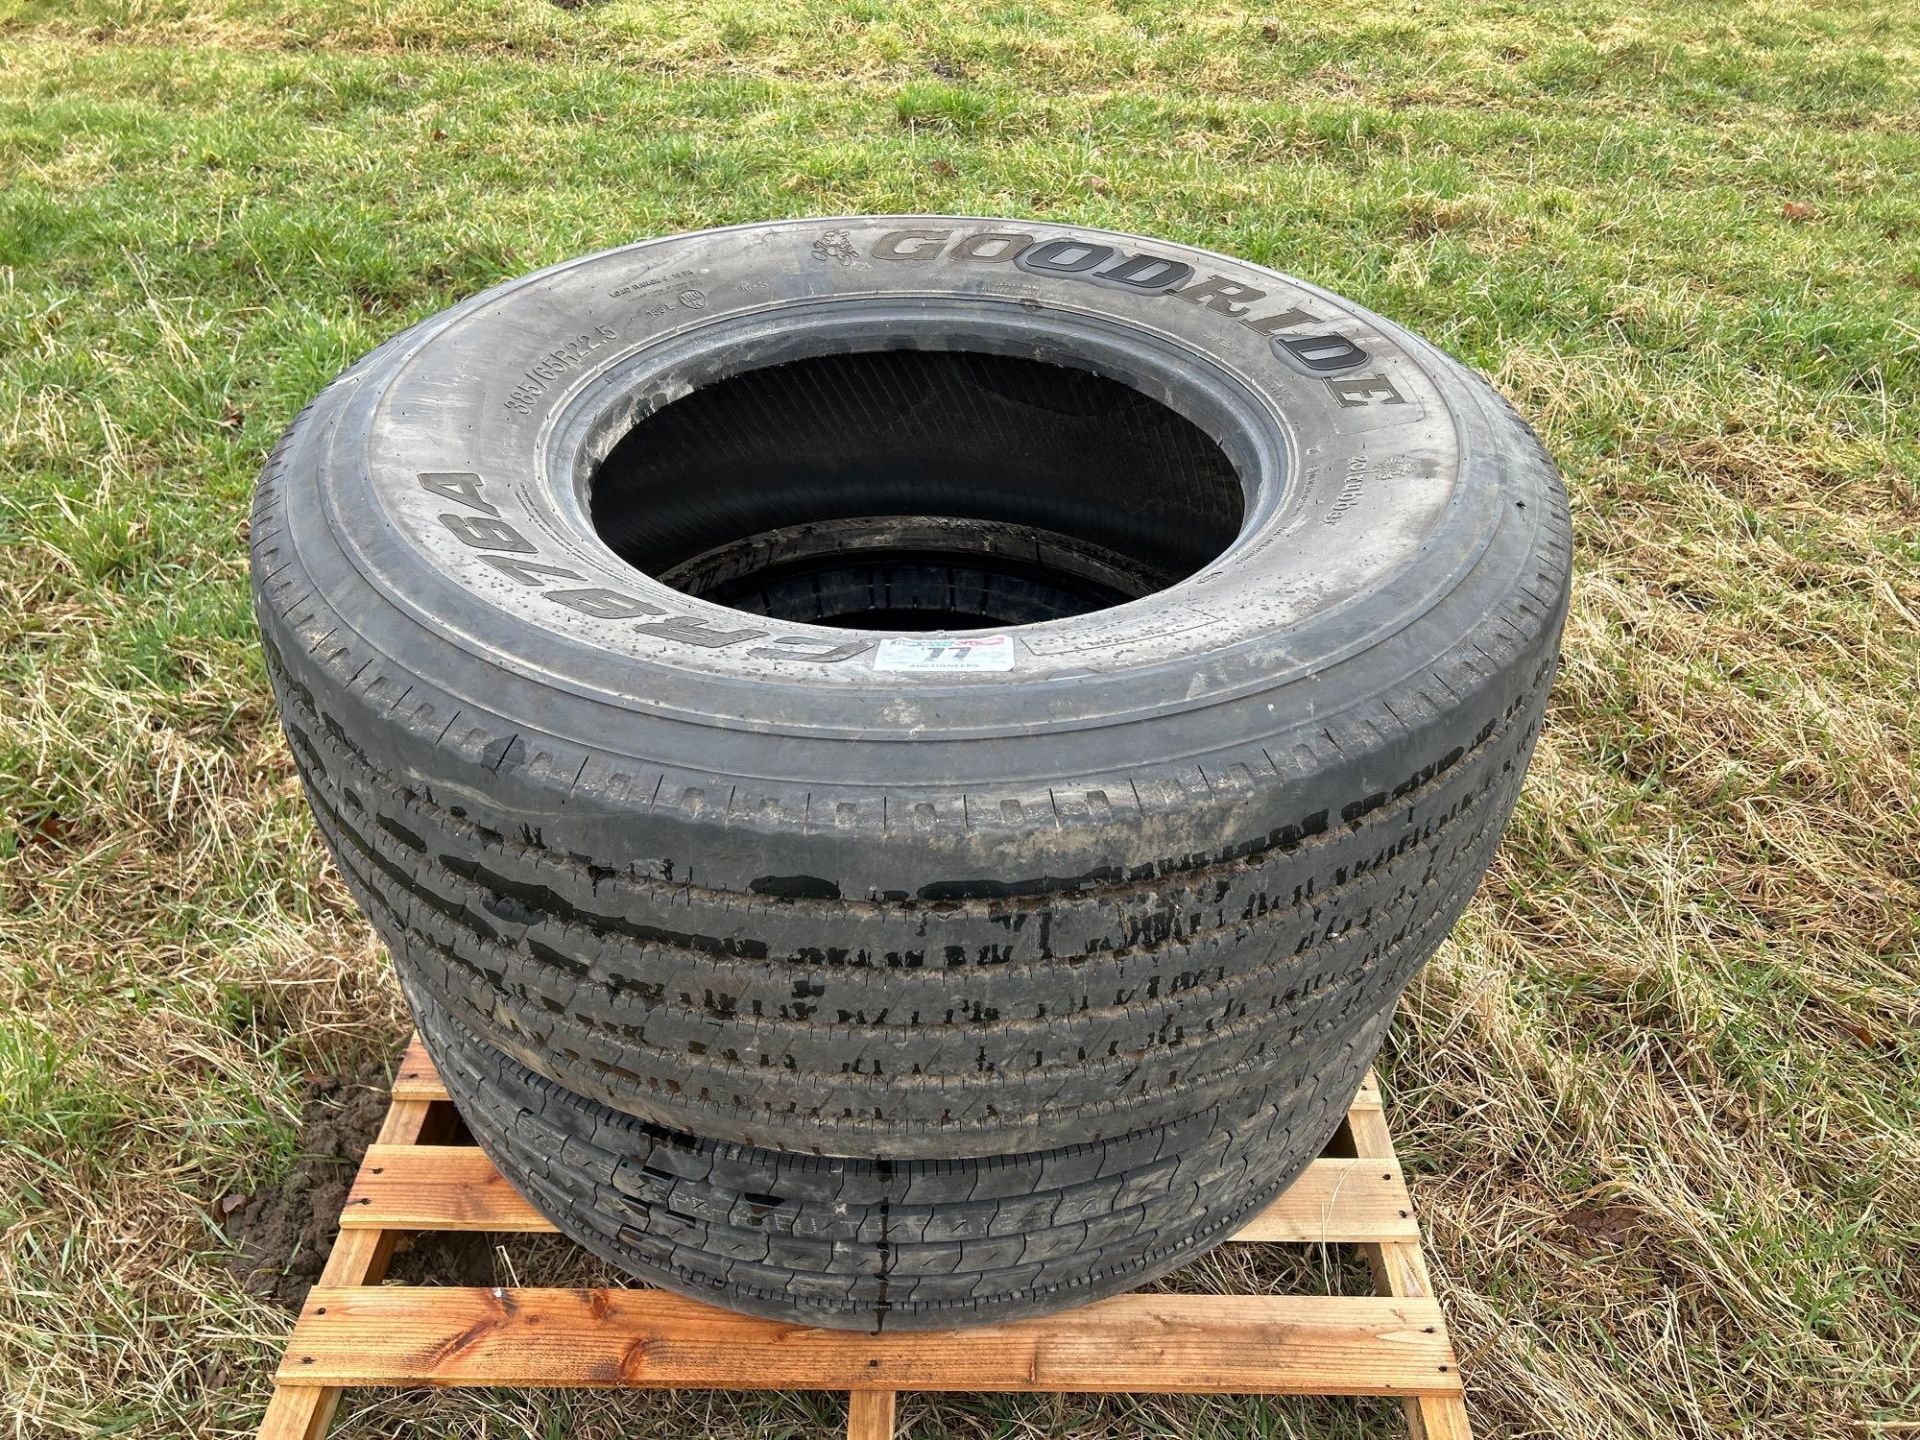 Pair of 385/65R22.5 tyres (Brand New)